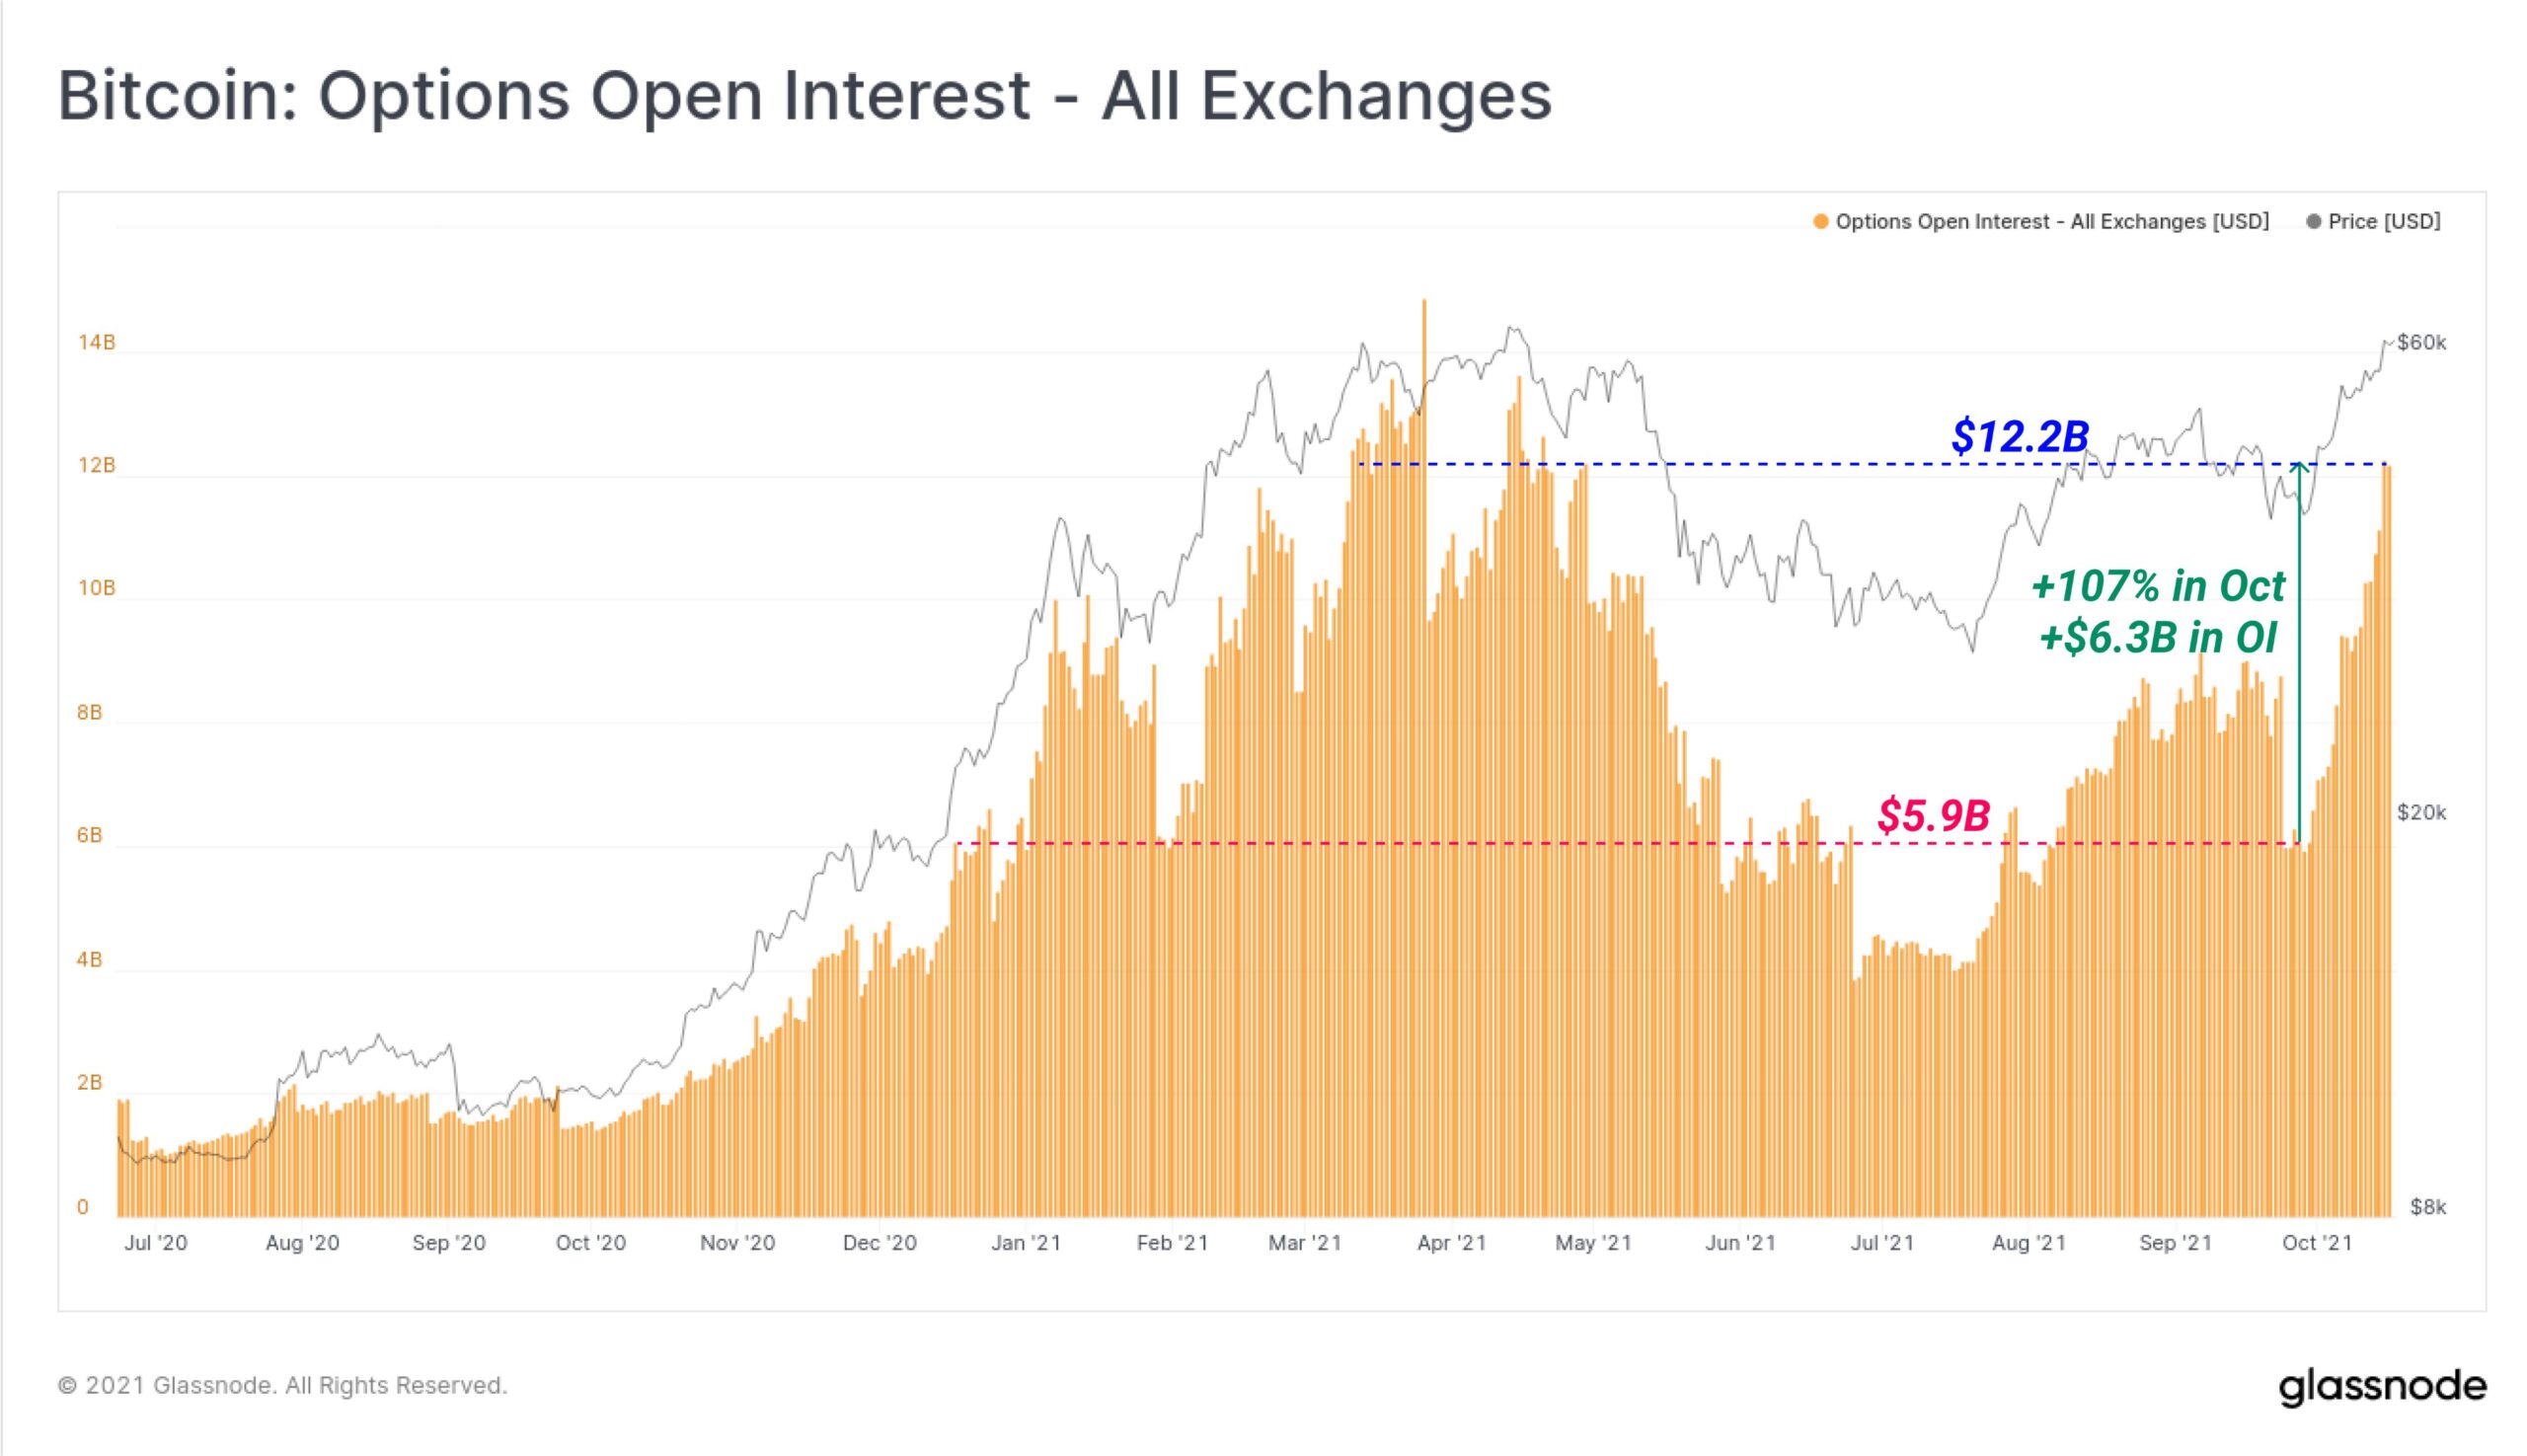 Surging Open Interest and Leverage May Lead to Bitcoin Market Correction